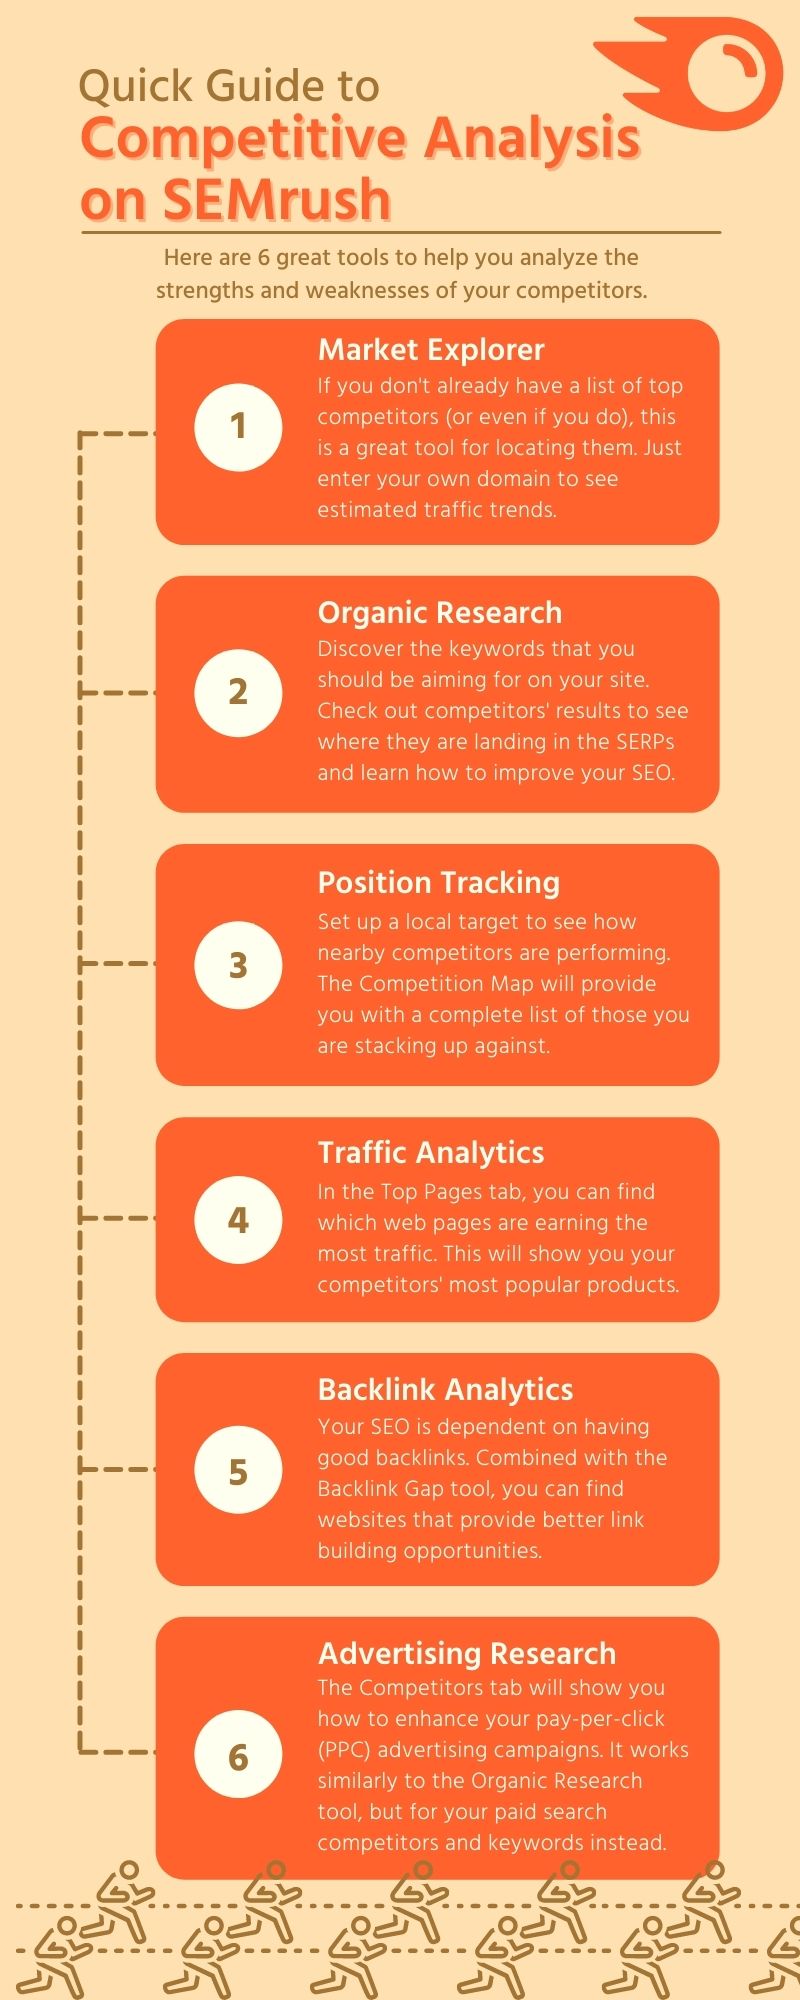 Quick Guide to Competitive Analysis on SEMrush